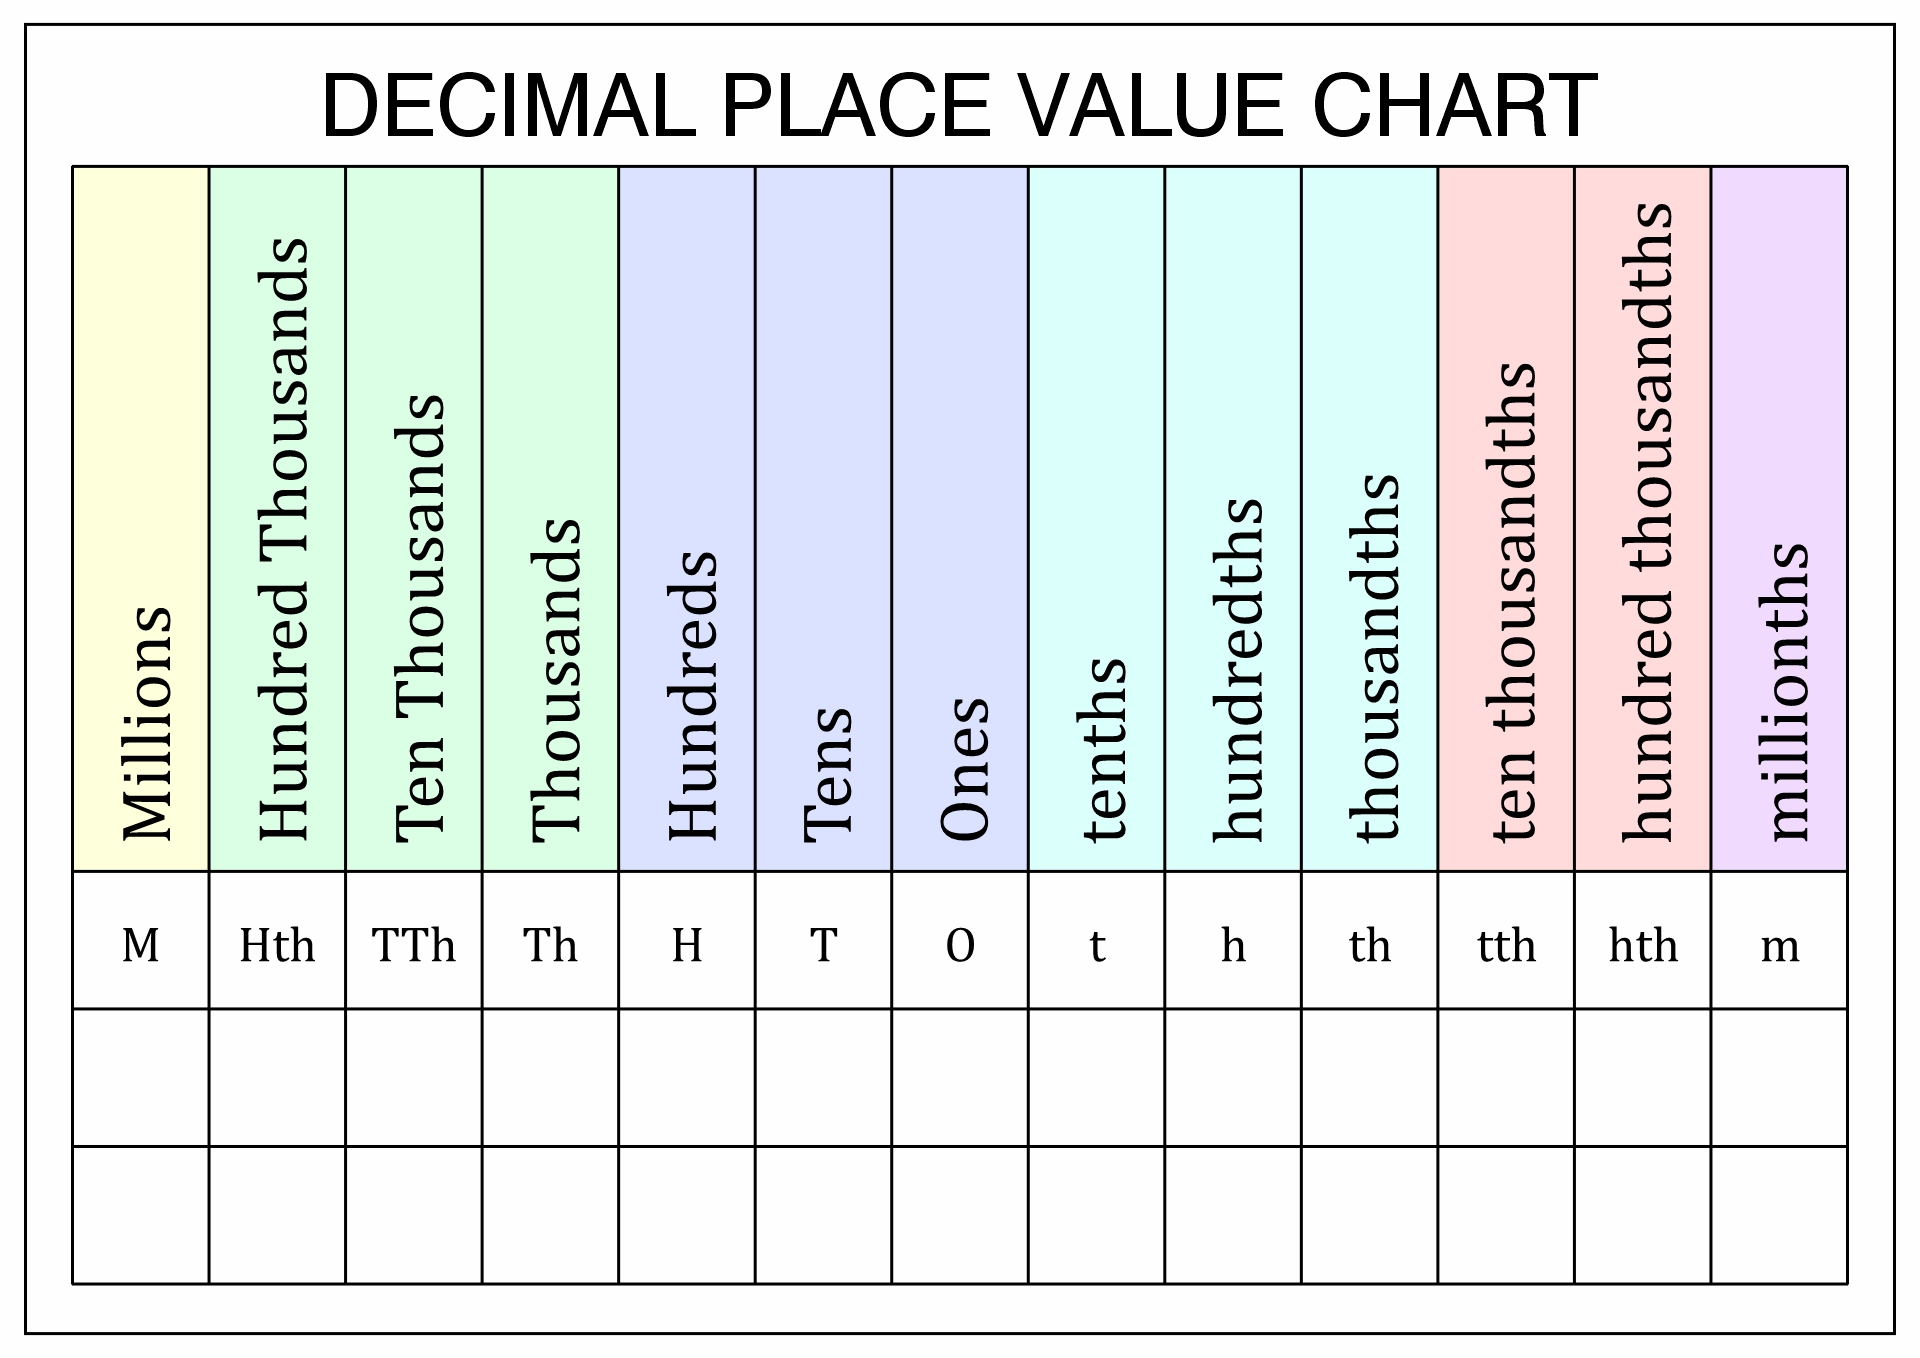 Place Value Chart with Decimals Image